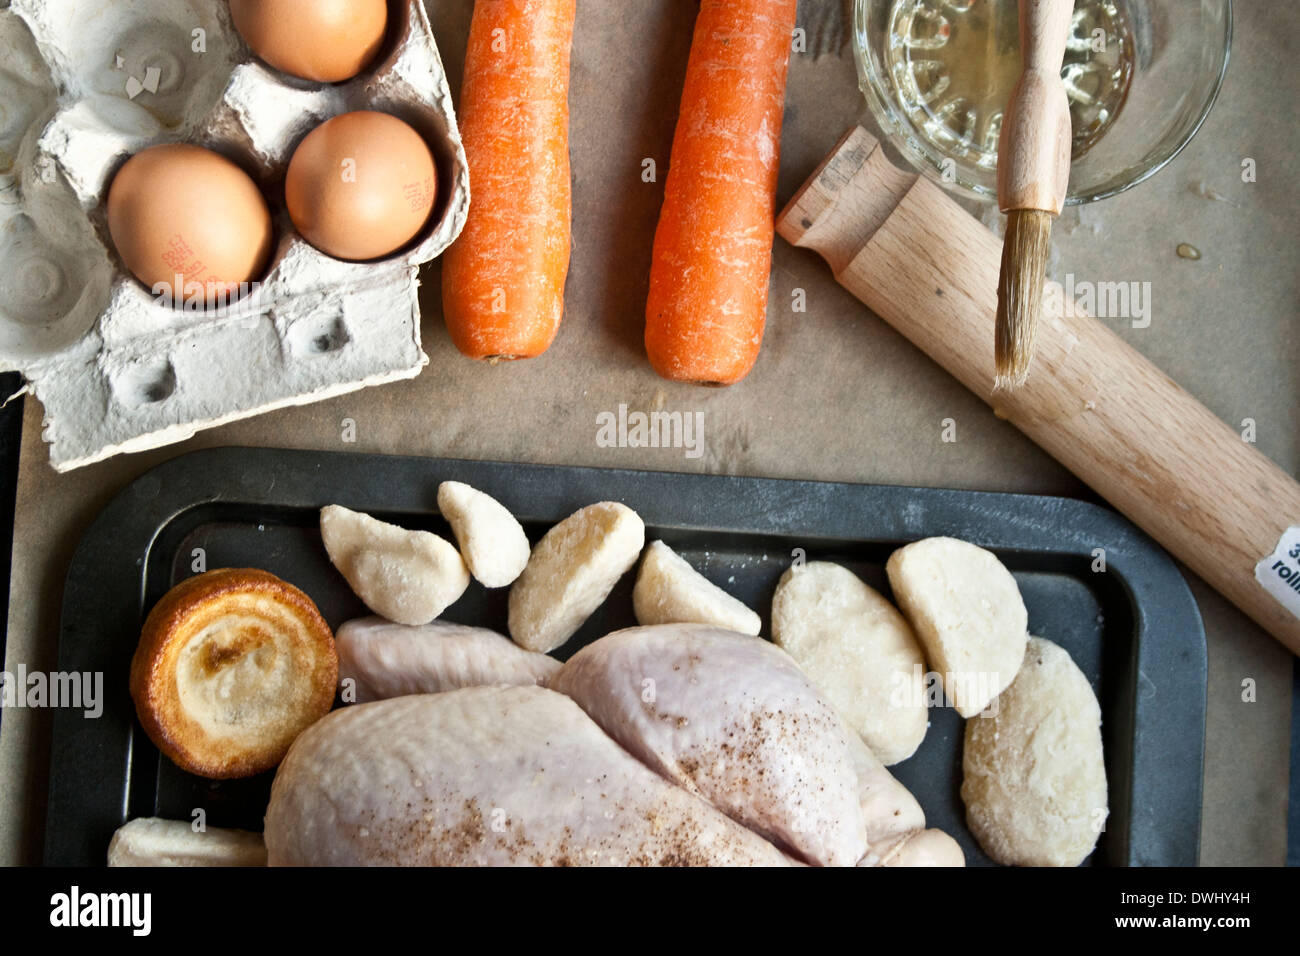 A shot of a chicken and vegetables unprepared. Stock Photo